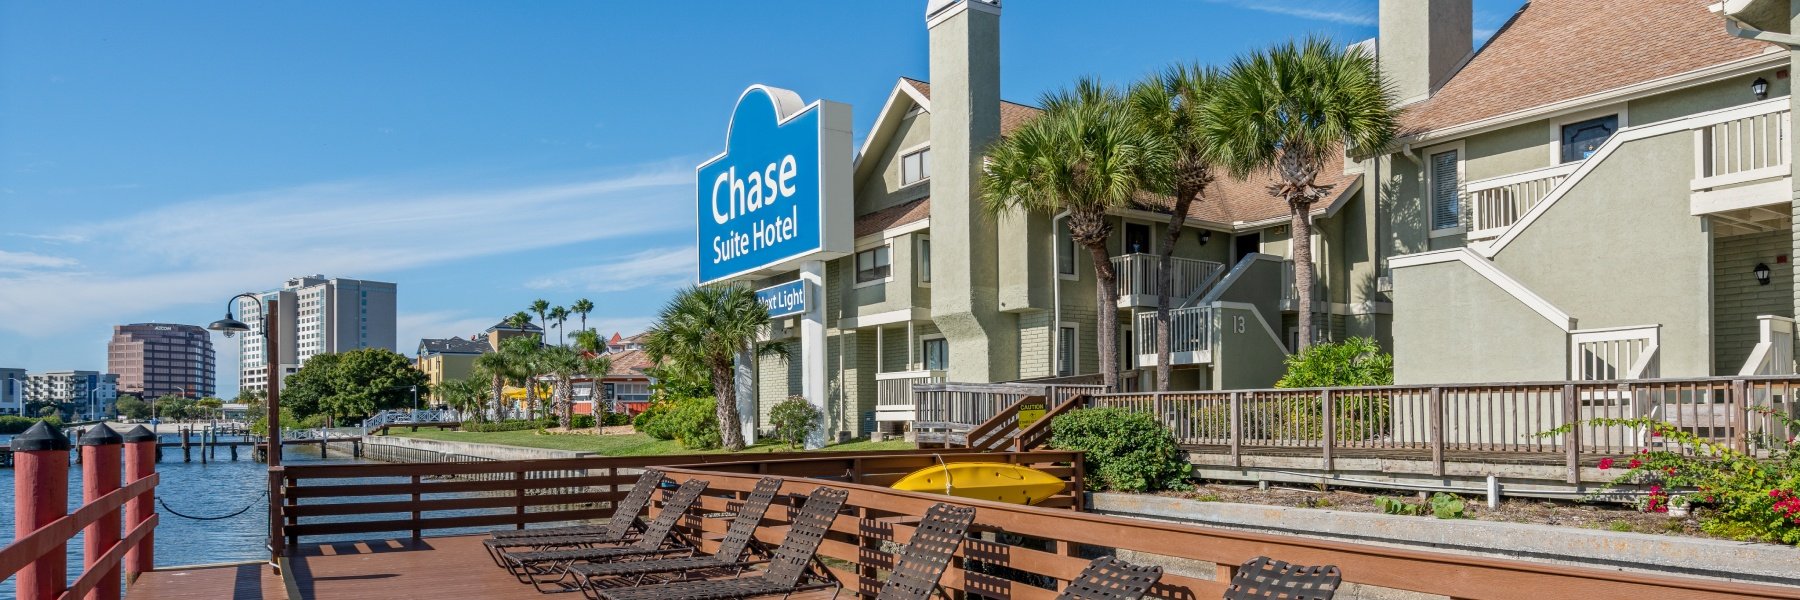 Specials - Chase Suite Hotel Tampa/Rocky Point, Tampa Florida